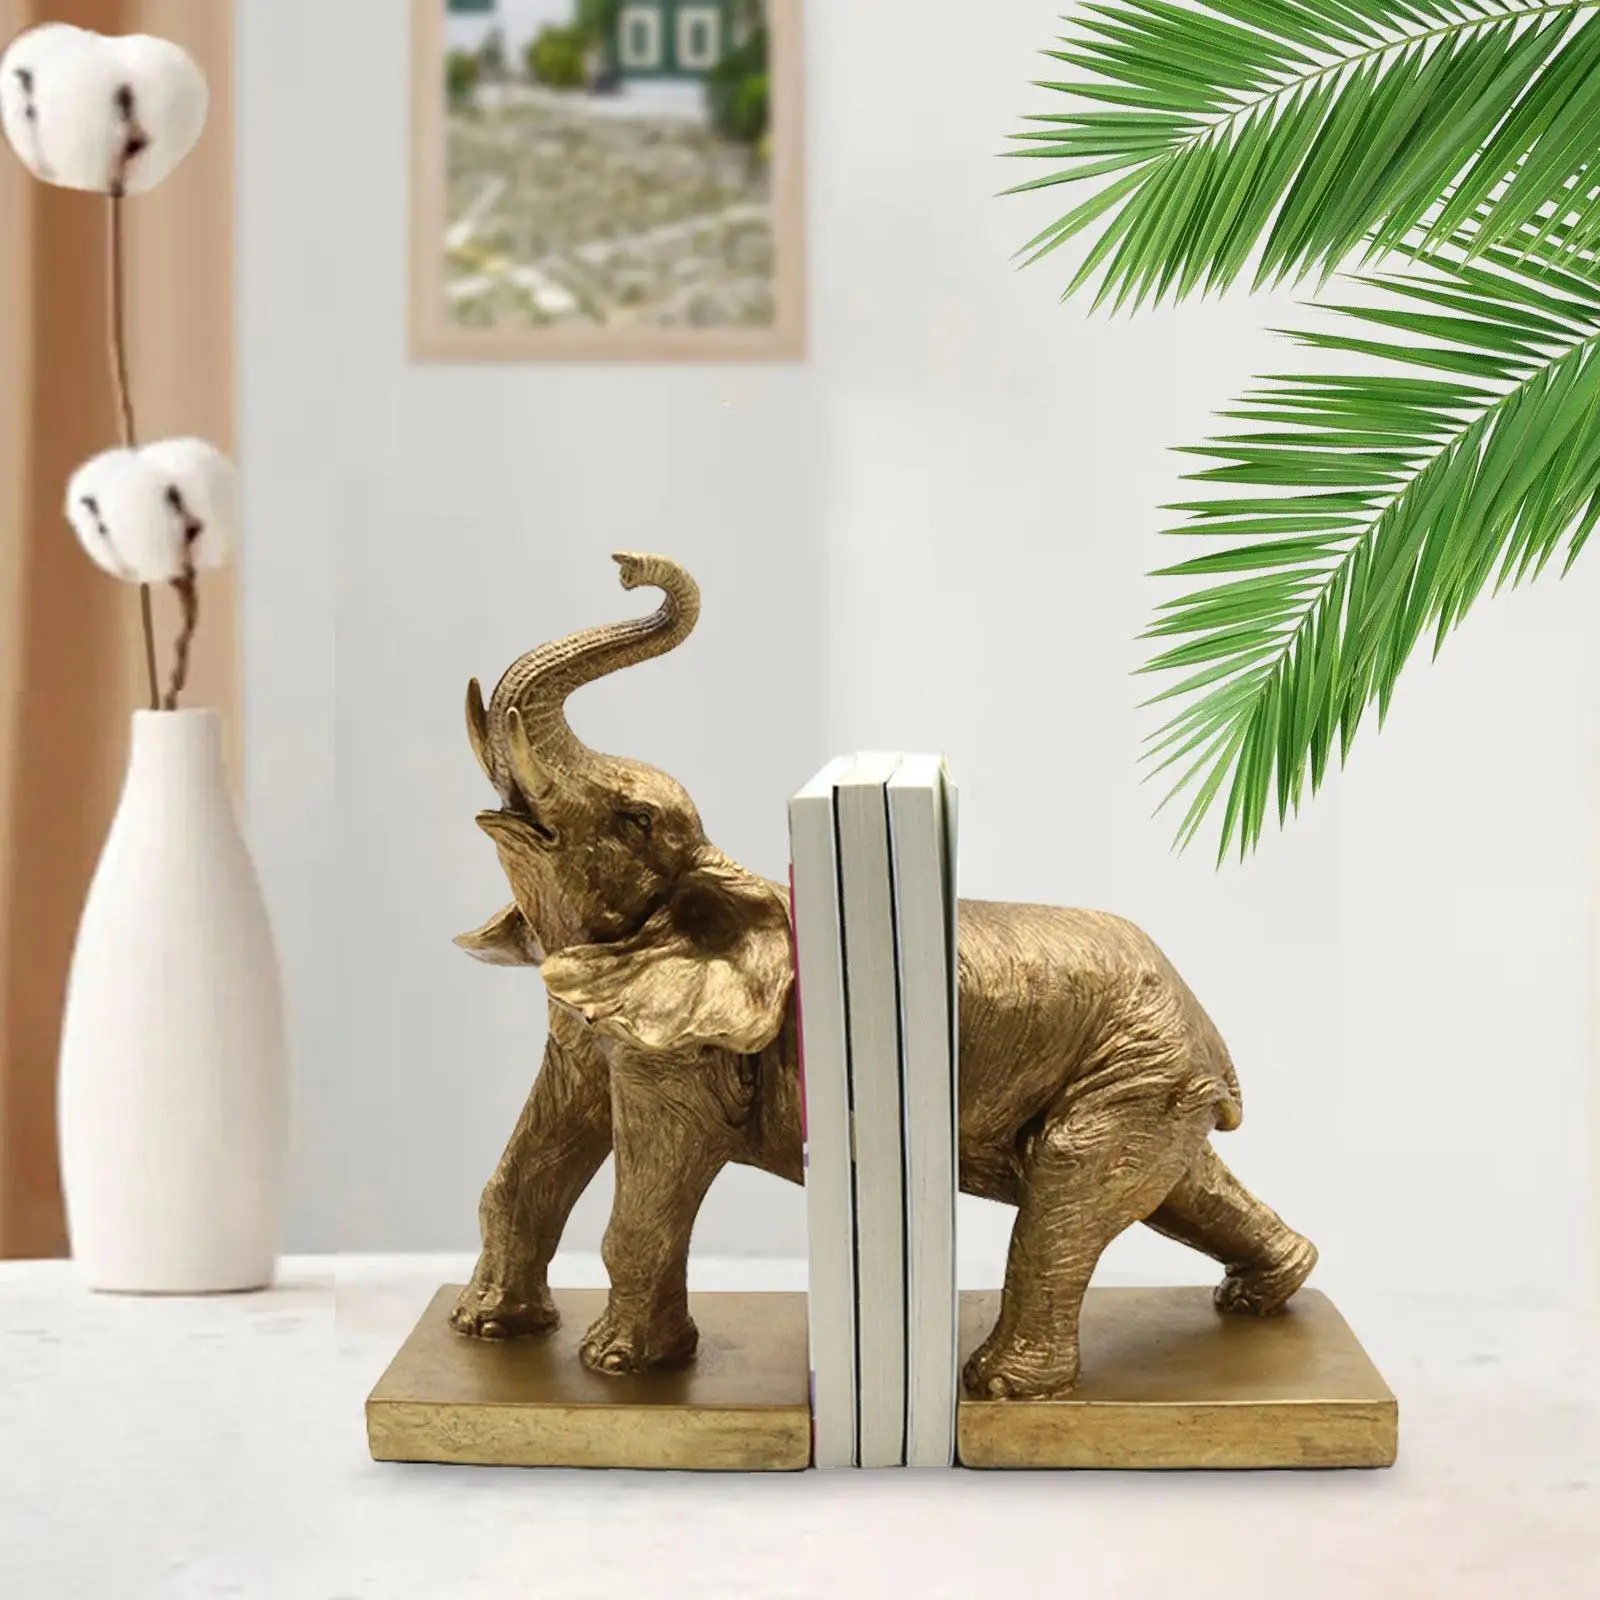 Elephant Figurine Bookfile Creative Ornament Nordic Book Stand Book Stopper for Home Living Room Wine Cabinet Tabletop Bookshelf